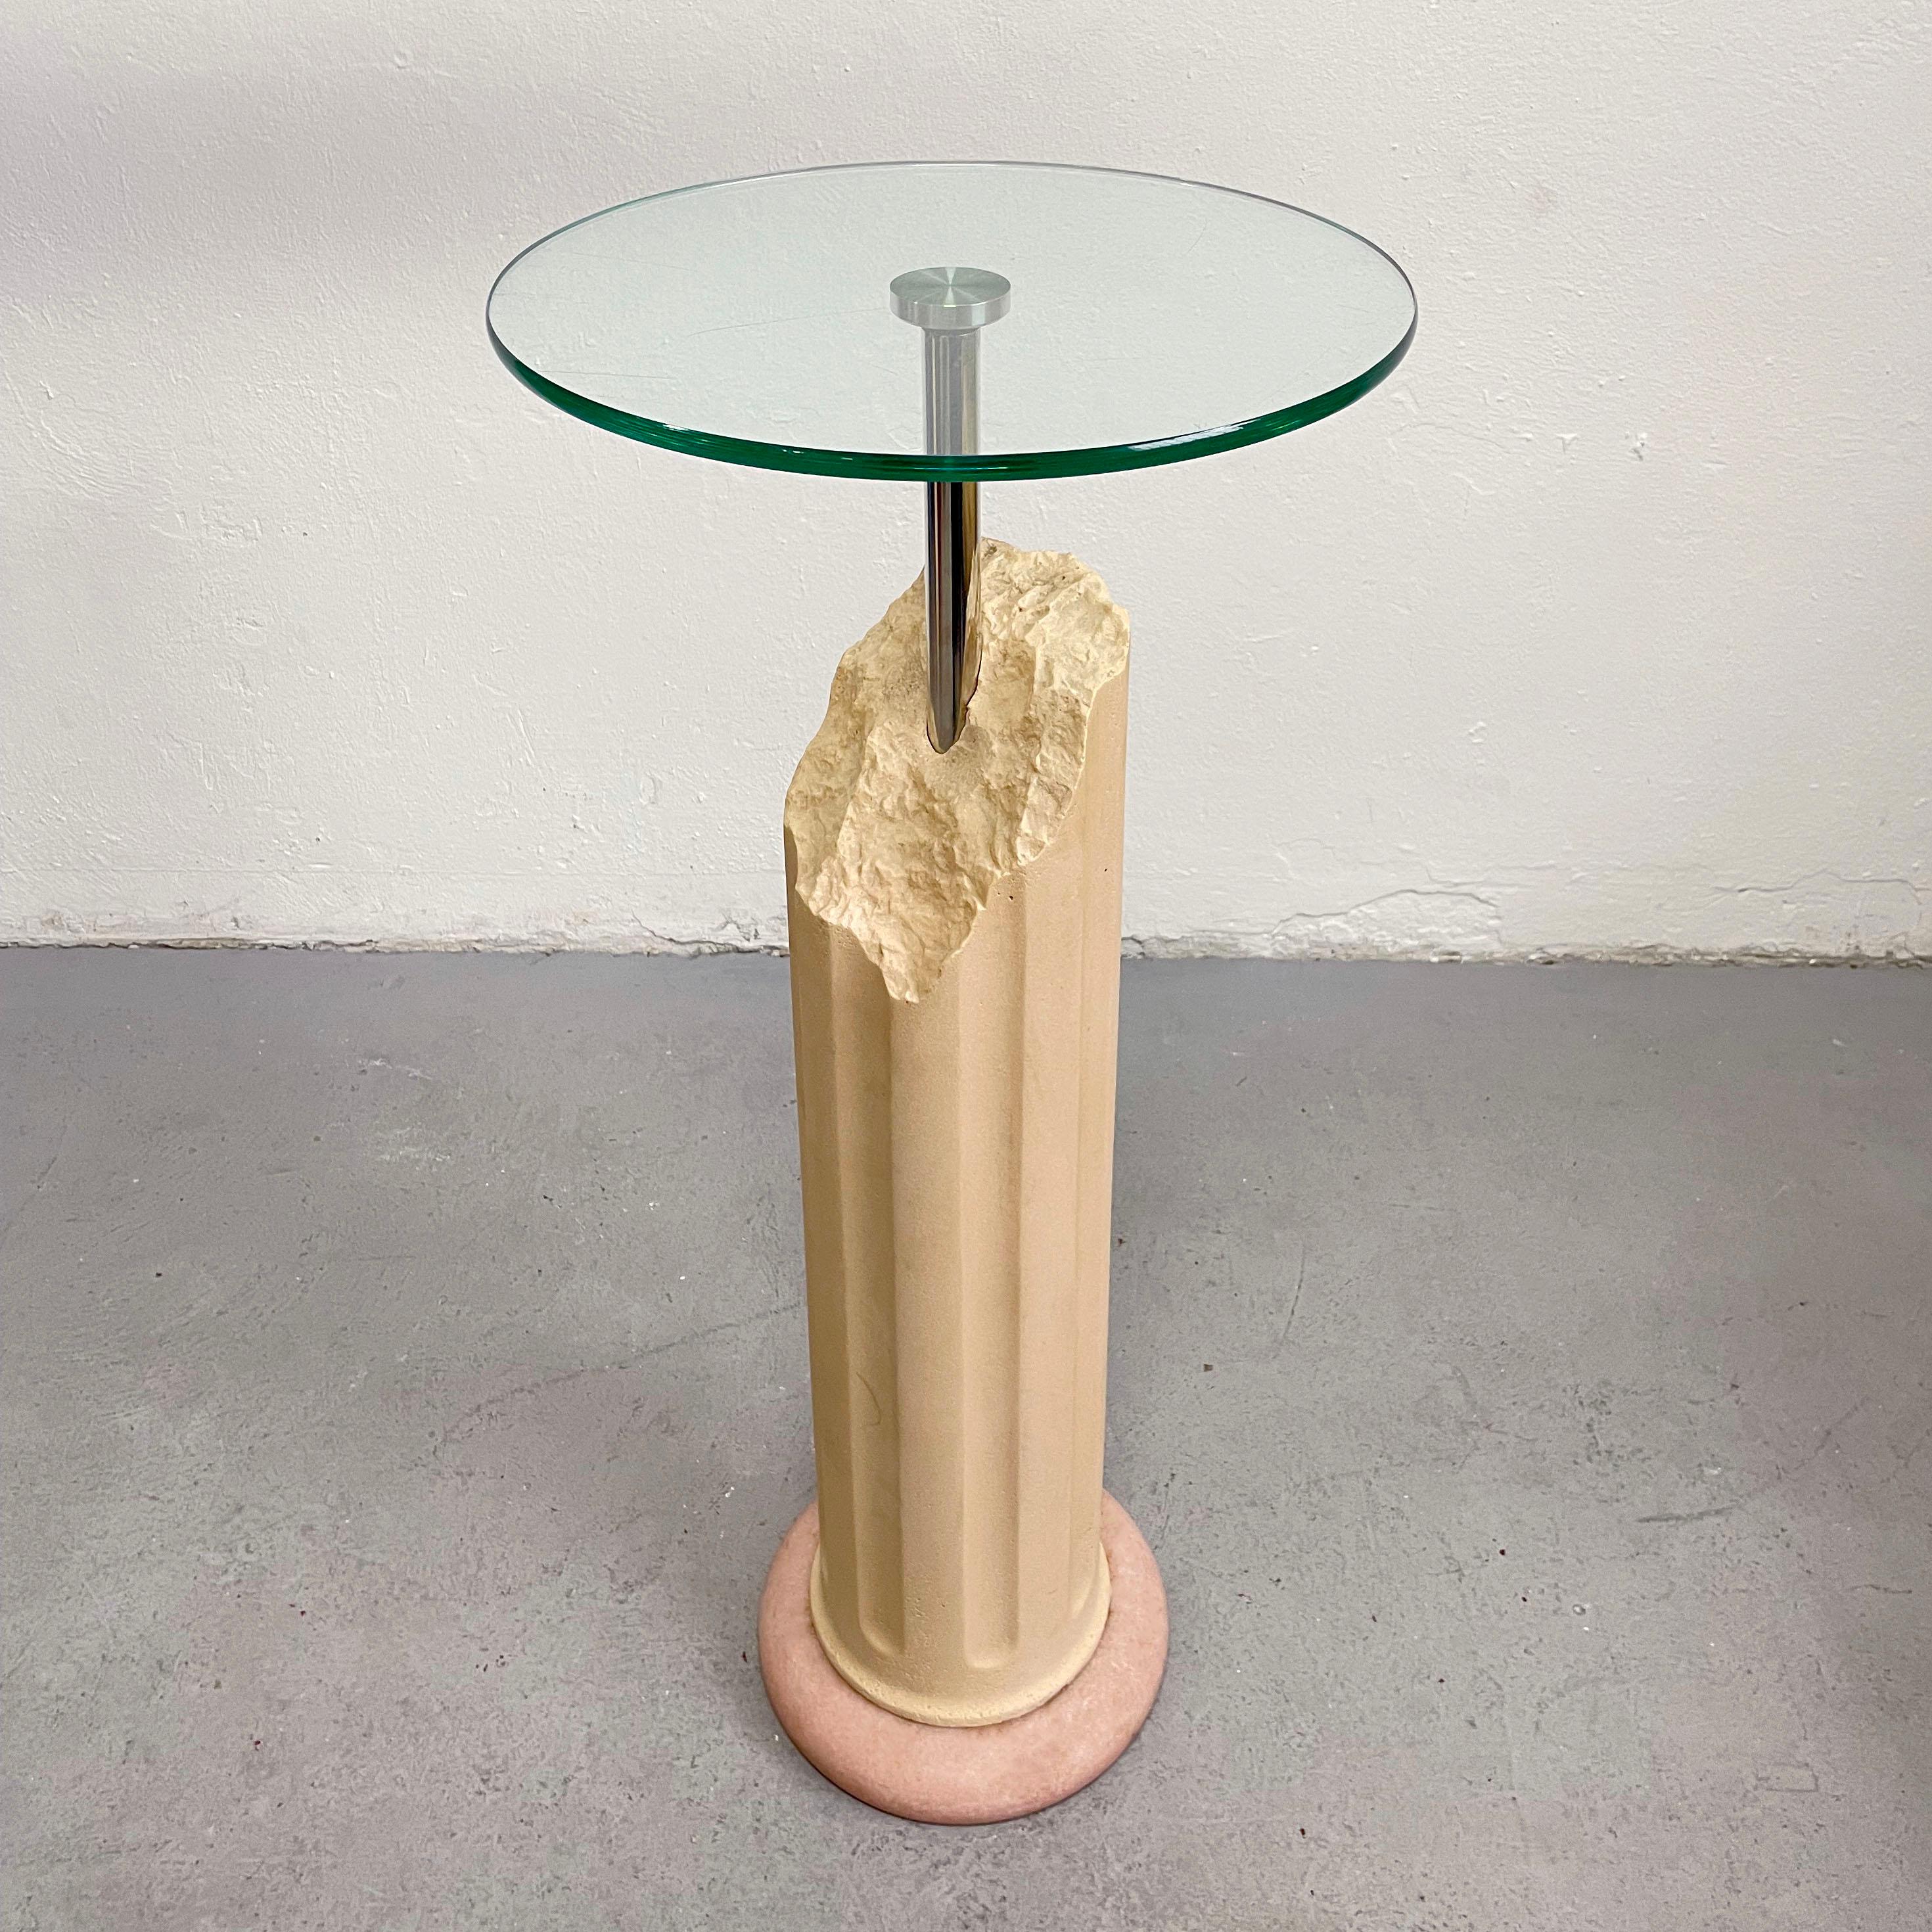 Postmodern pedestal table from the 1980s/1990s

Unknown manufacturer

The base is made of pink marble stone and concrete, table top is made of tempered clear glass

